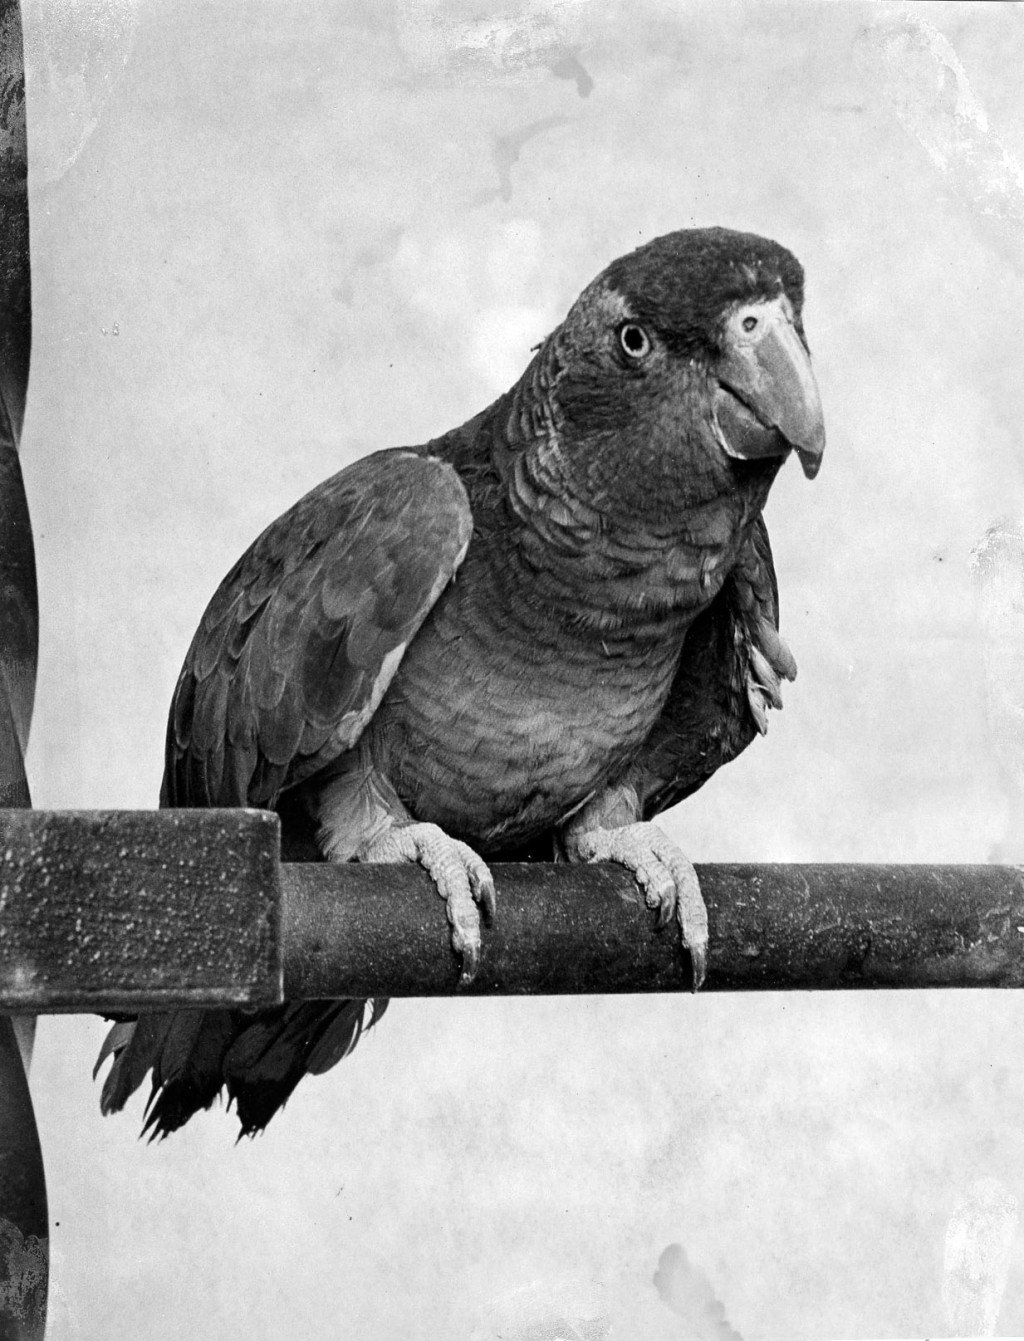 Oct. 5, 1930 • A potty-mouthed parrot shocks visitors to St. Louis Zoo